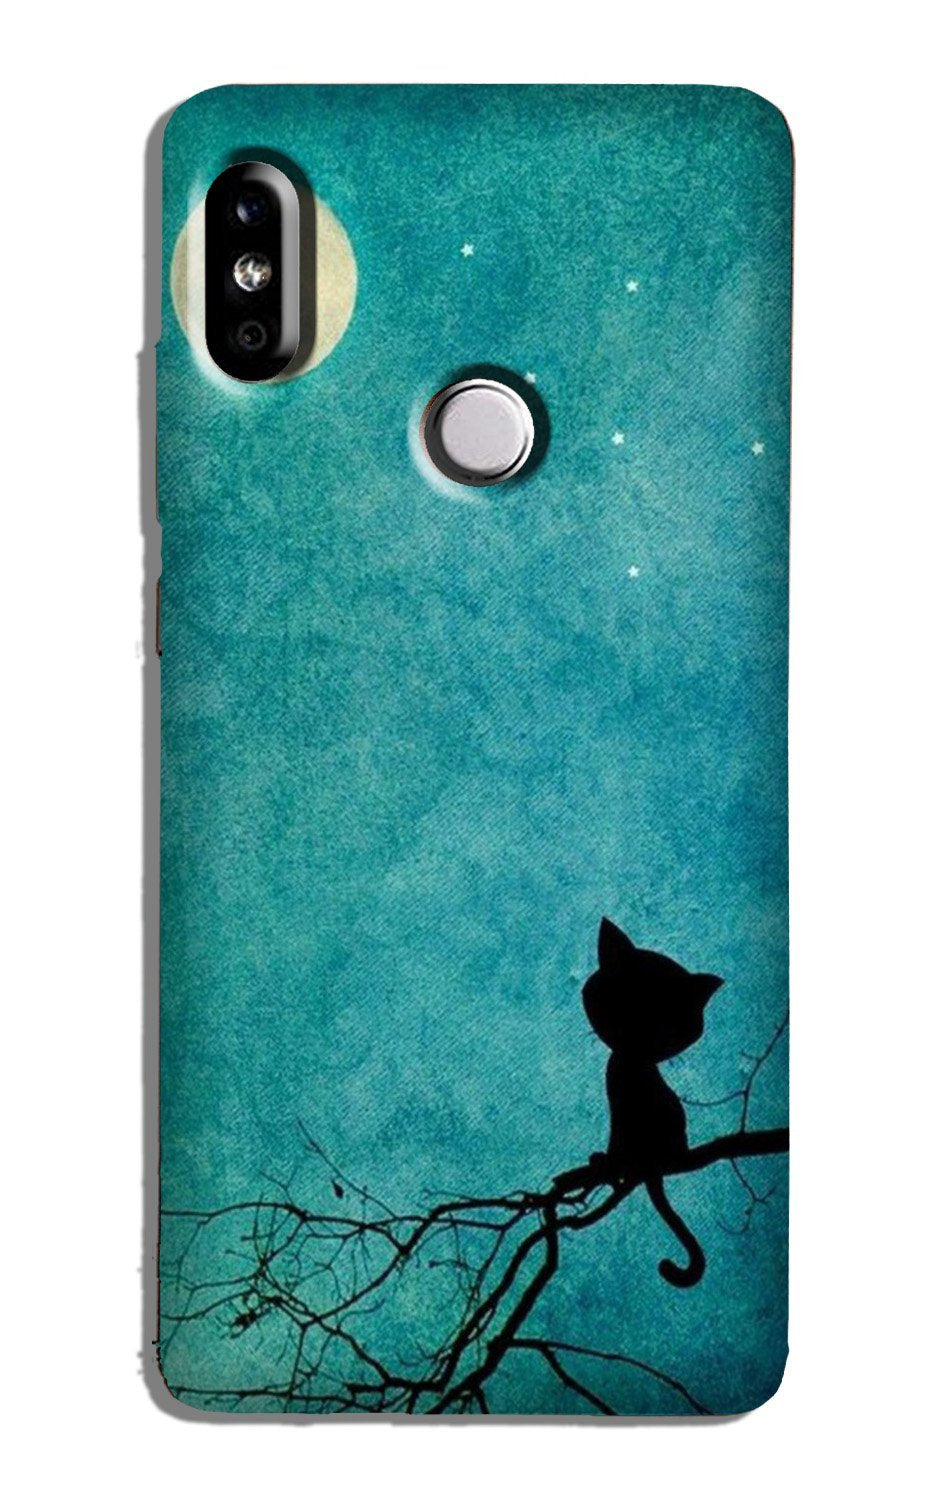 Moon cat Case for Redmi Note 5 Pro